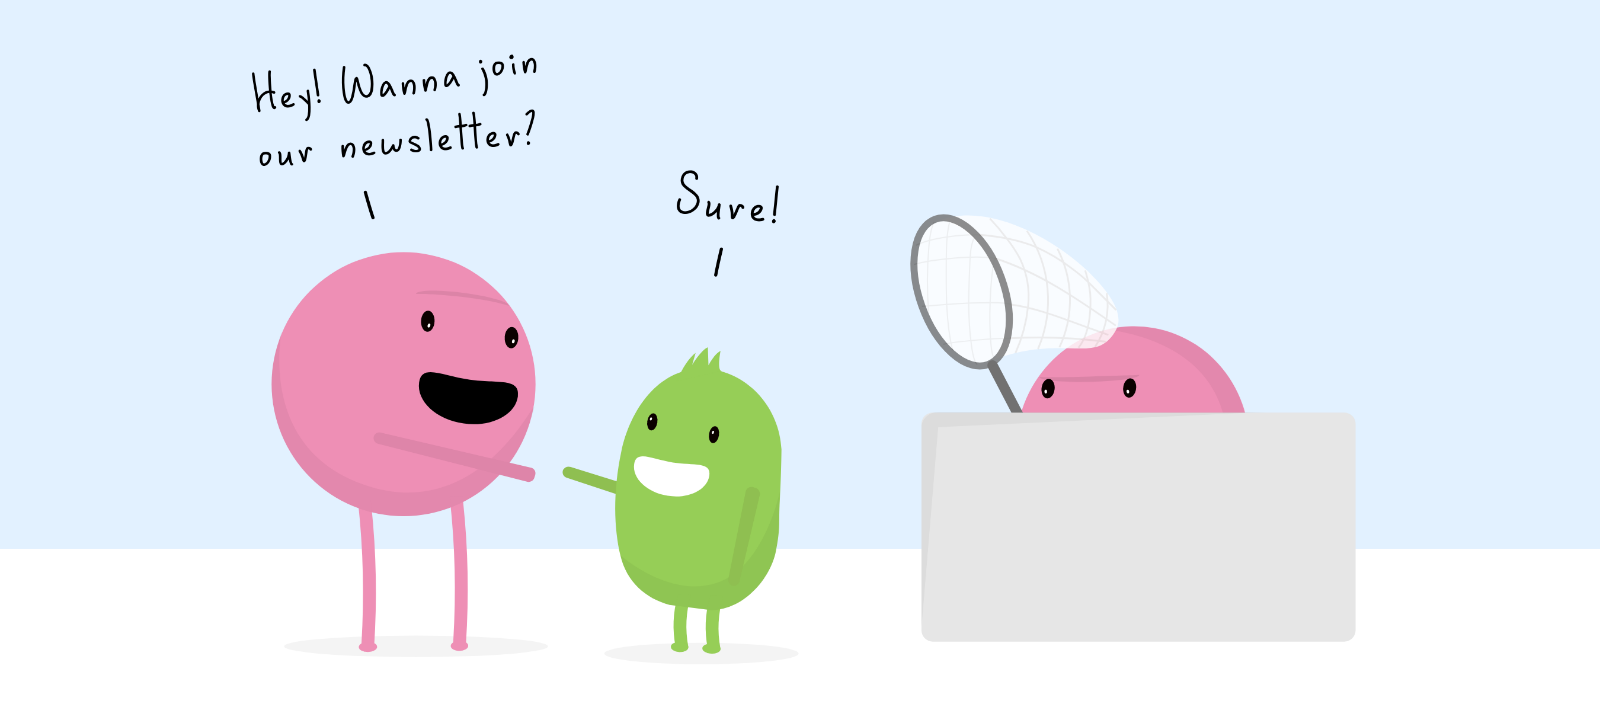 A cartoon depicting a large pink blob character asking a small green blob character 'Hey! Wanna join our newsletter?'. The green blob character smiles and says 'Sure!'. However, there is another blob watching closely, hiding behind a wall and waiting to catch the small green blob character with a large fishing net.